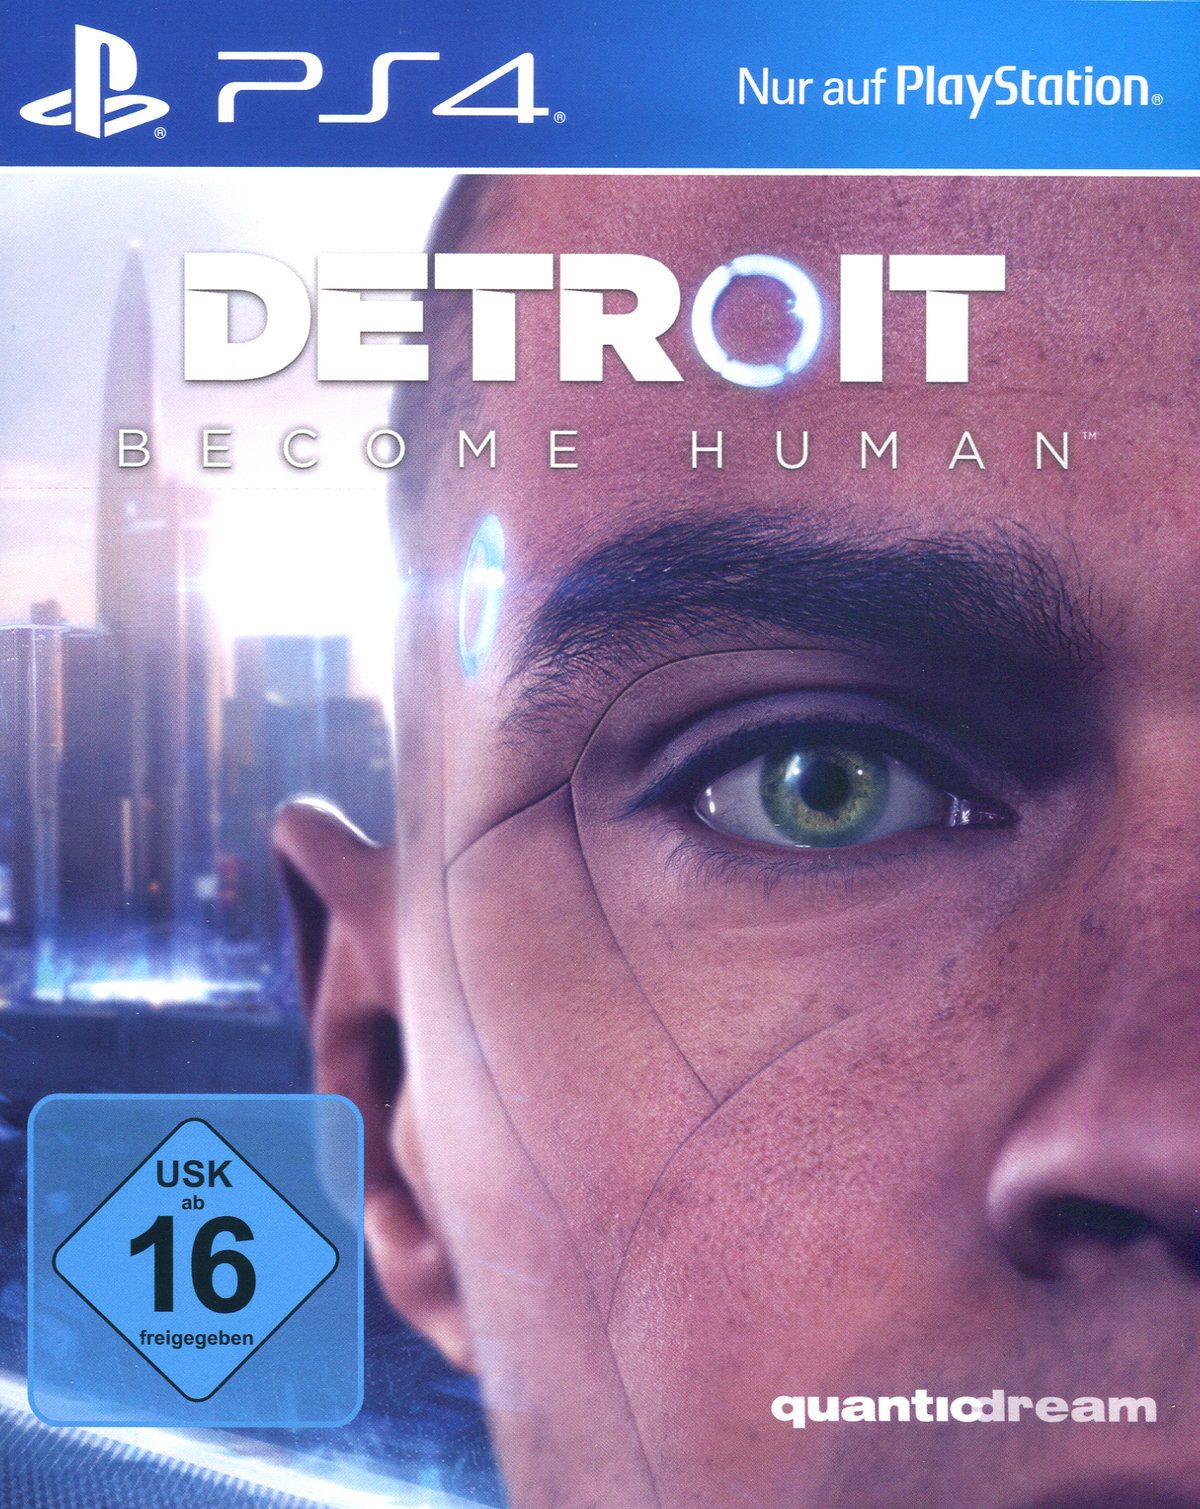 Detroit: Become Human Playstation 4